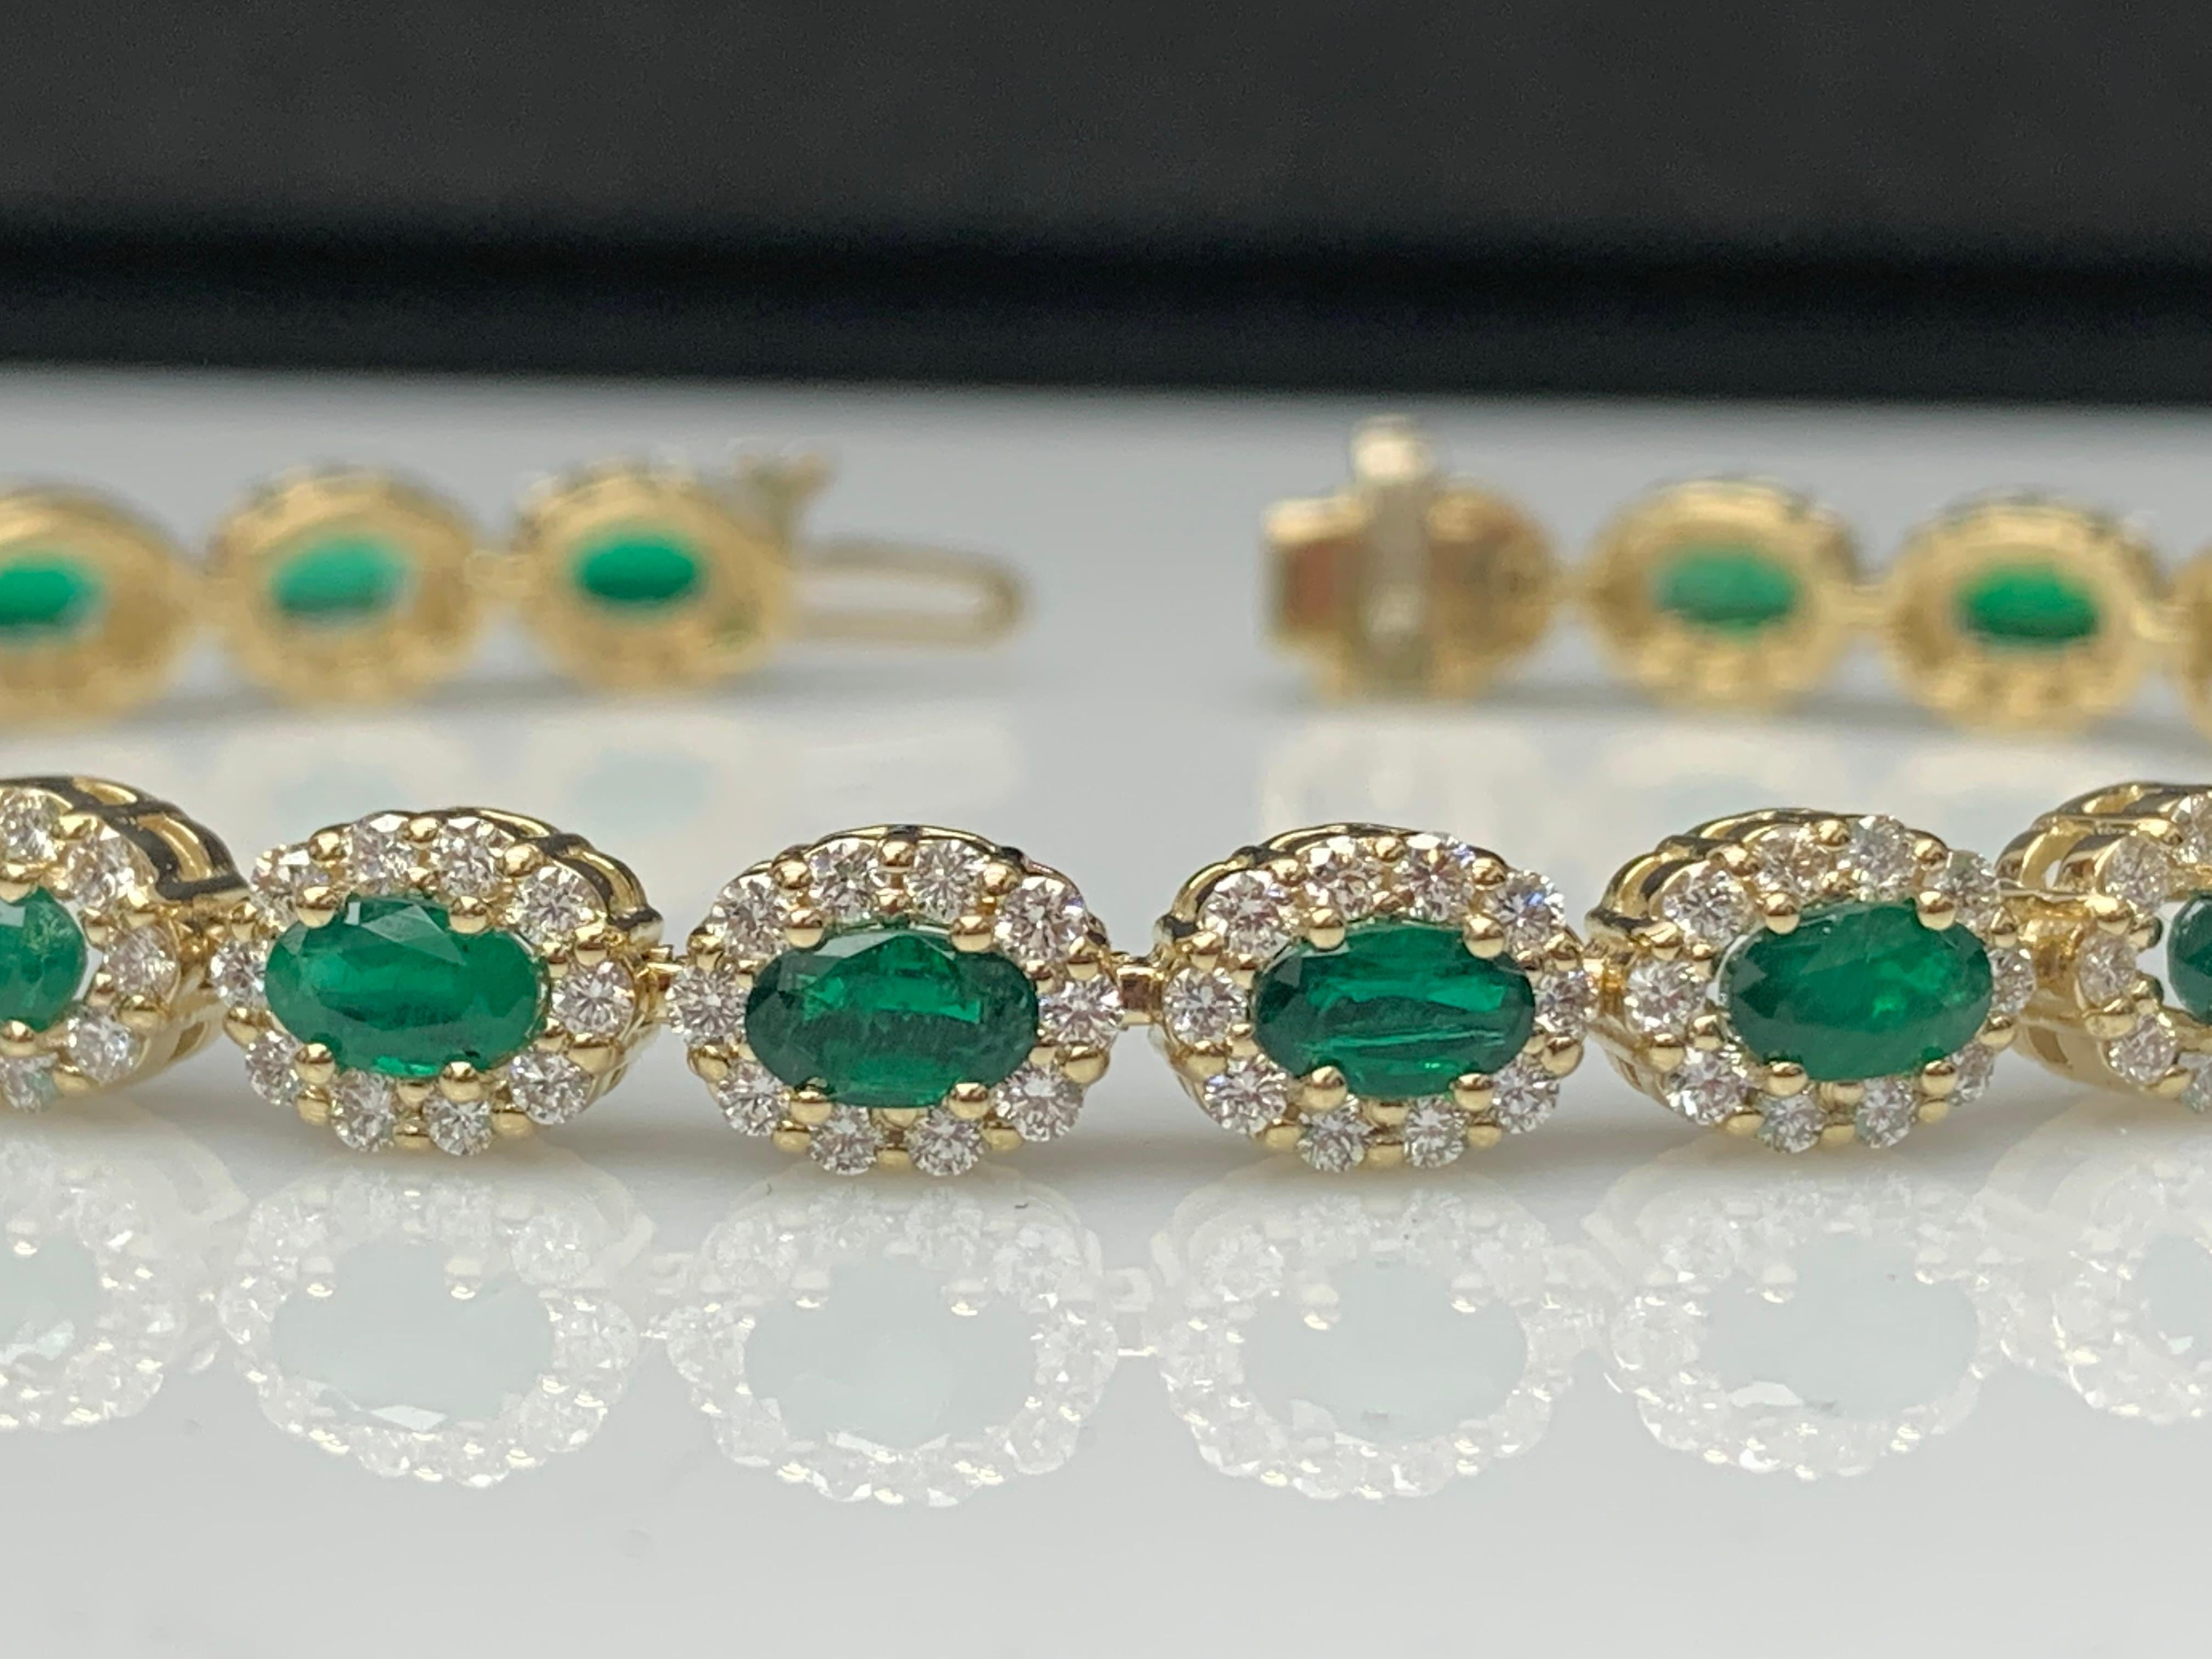 4.69 Carat Oval Cut Emerald and Diamond Halo Bracelet in 14K Yellow Gold For Sale 5